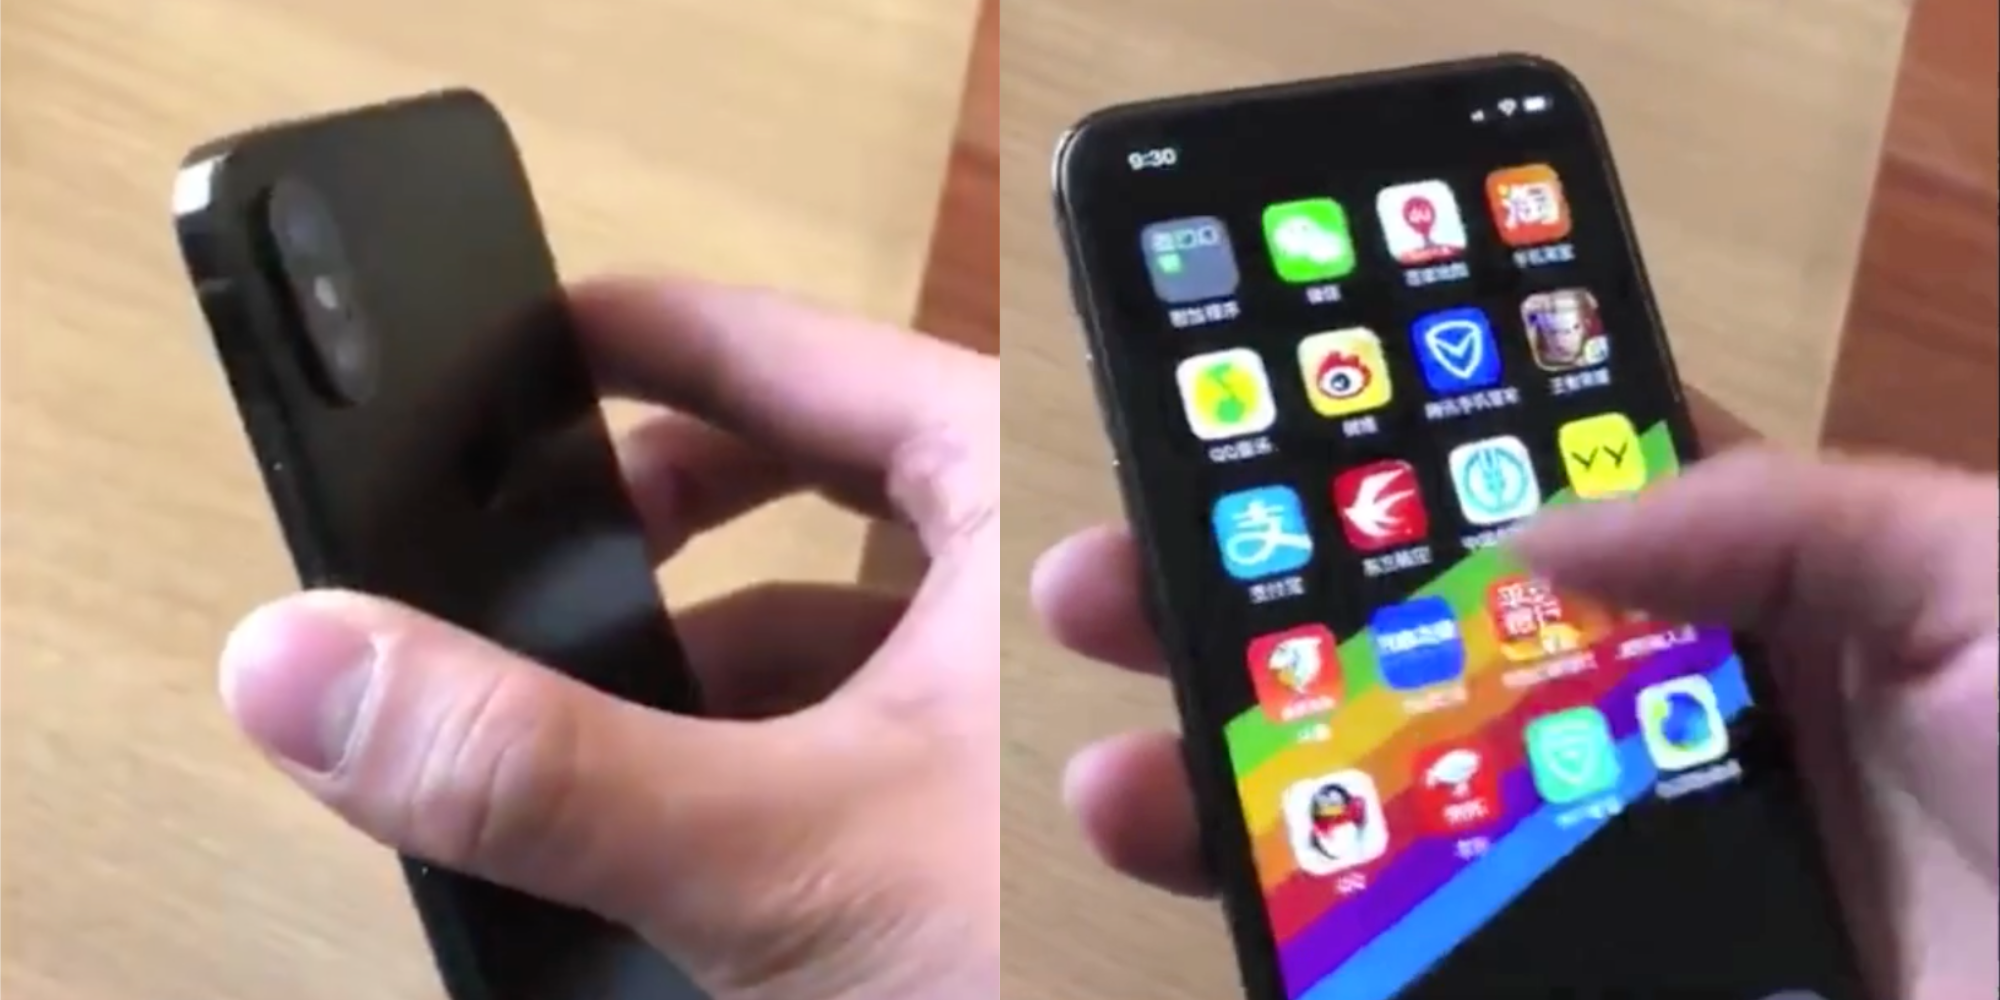 Unlikely Iphone Se 2 With Iphone X Design Surfaces In New Video 9to5mac